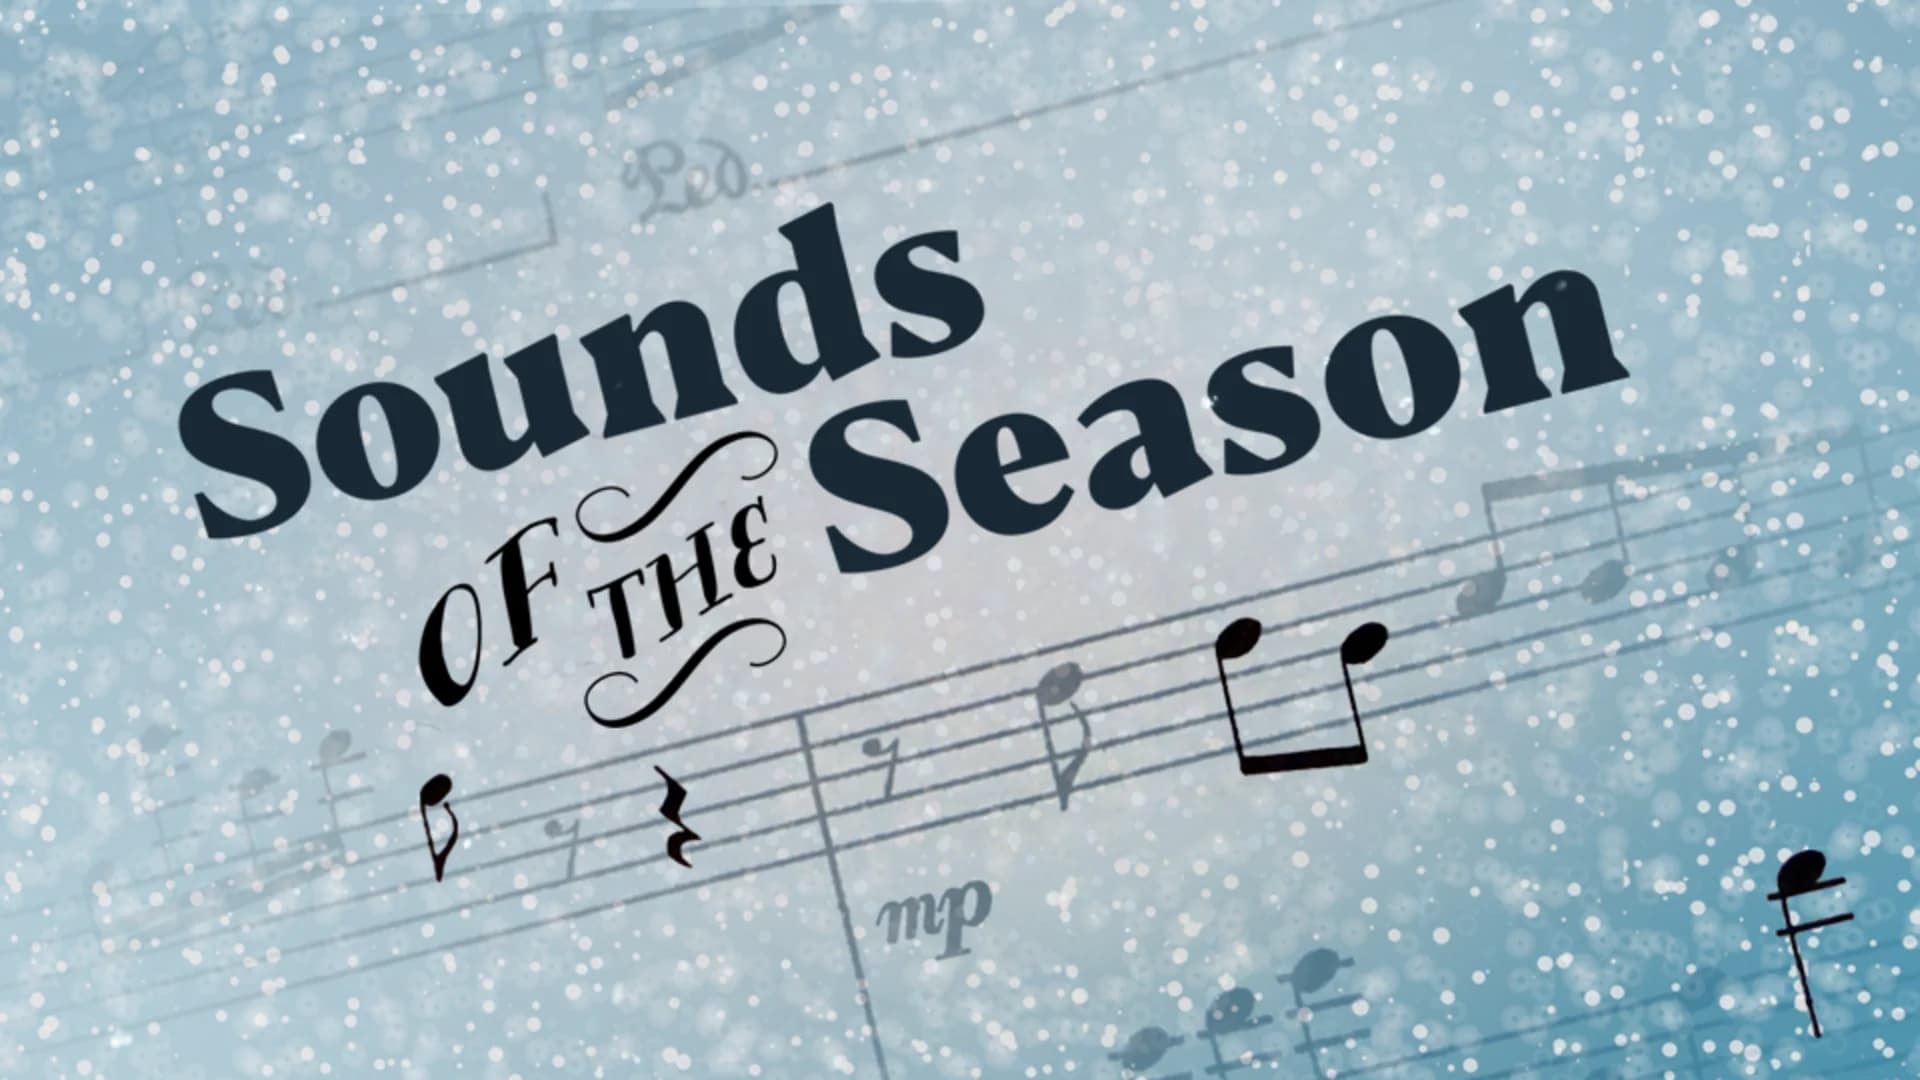 Sounds of the Season 2018 Schedule